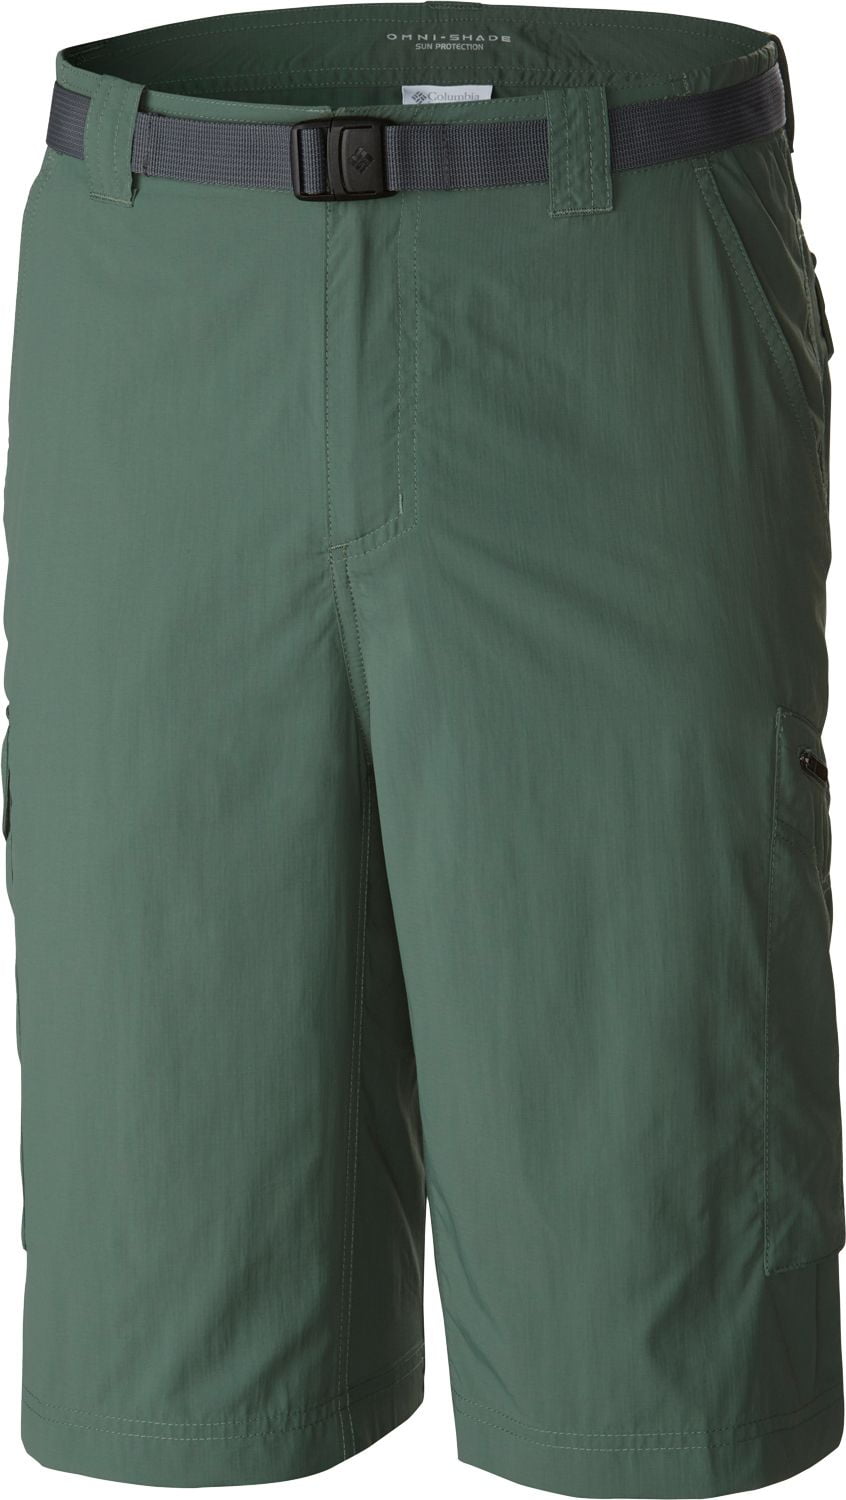 Breathable AM4084 Columbia Mens Silver Ridge Cargo Short UPF 50 Sun Protection Columbia Sporting Goods